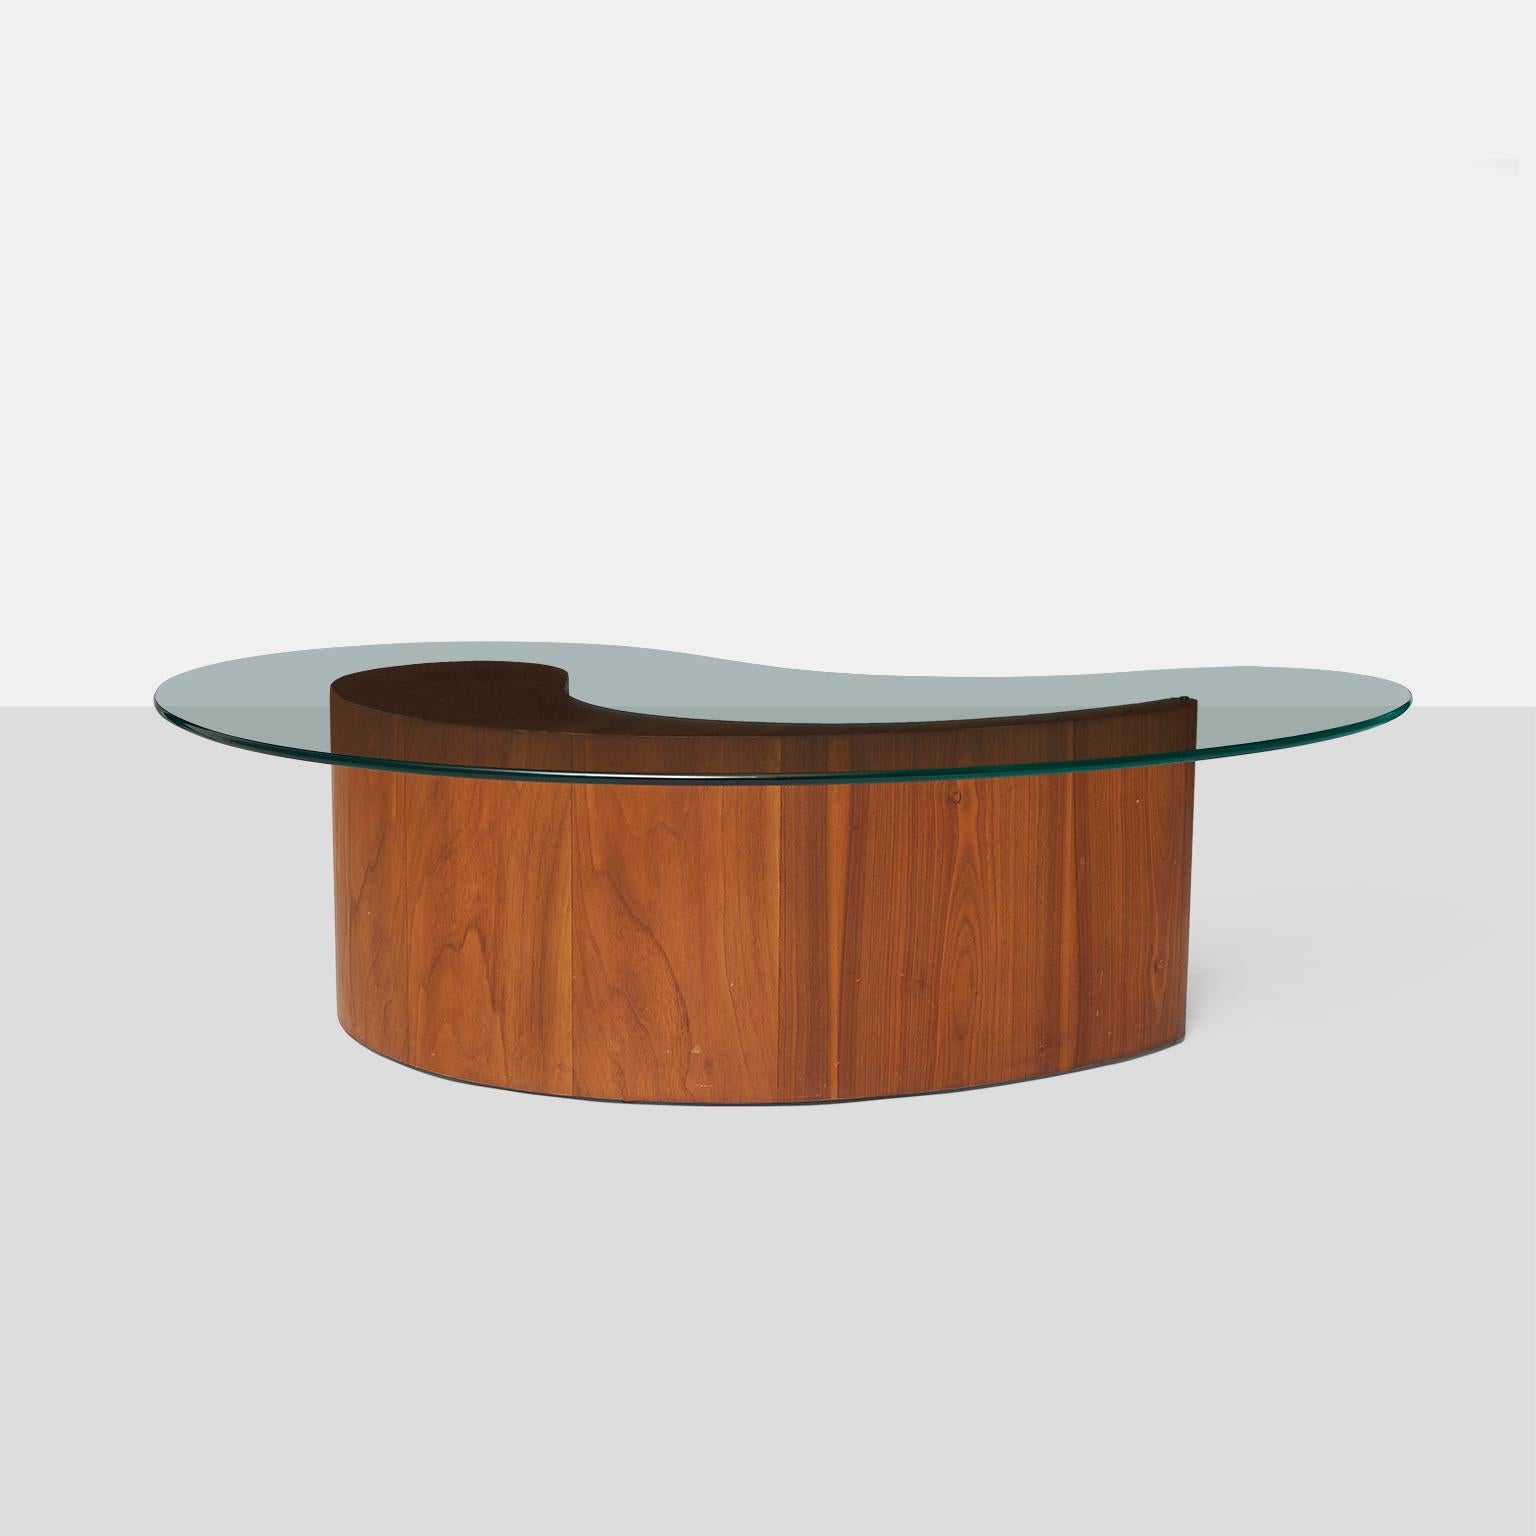 A coffee table with walnut base shaped like an apostrophe and a 1’2? glass top, attributed to Vladimir Kagan.